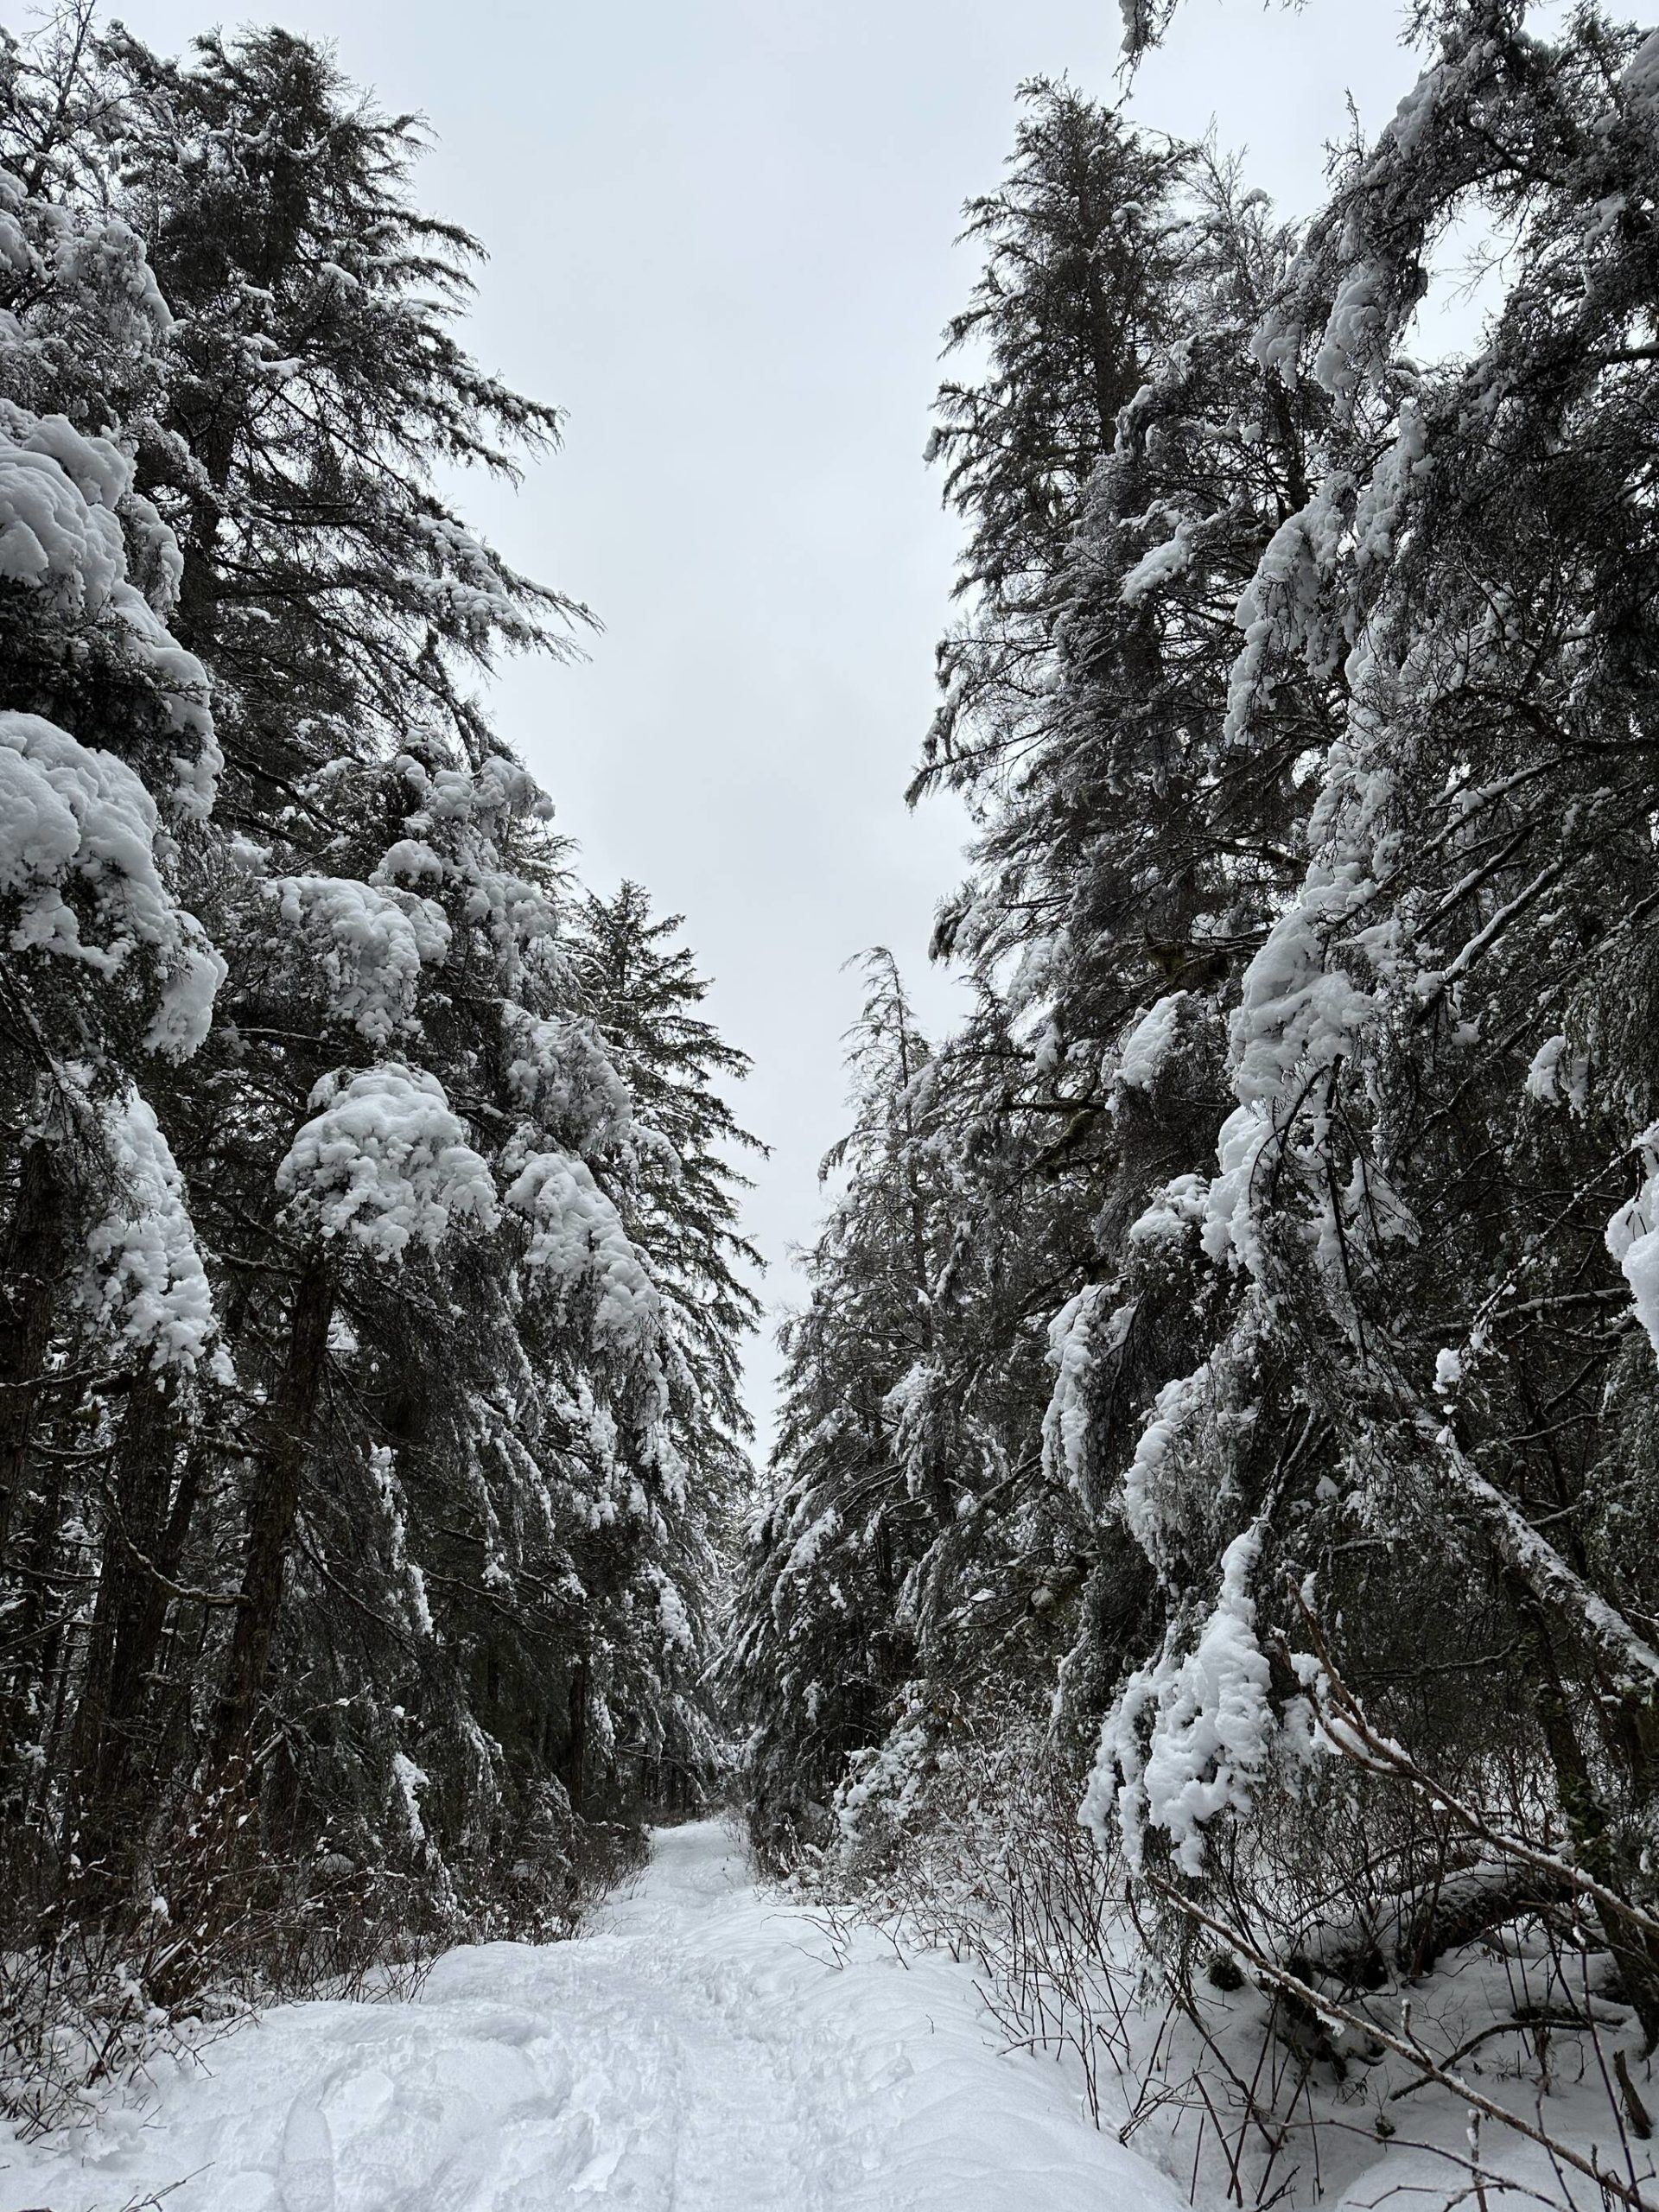 This photo shows a snowy New Year’s Eve scene on the Auk Nu Trail. (Courtesy Photo / Deana Barajas)